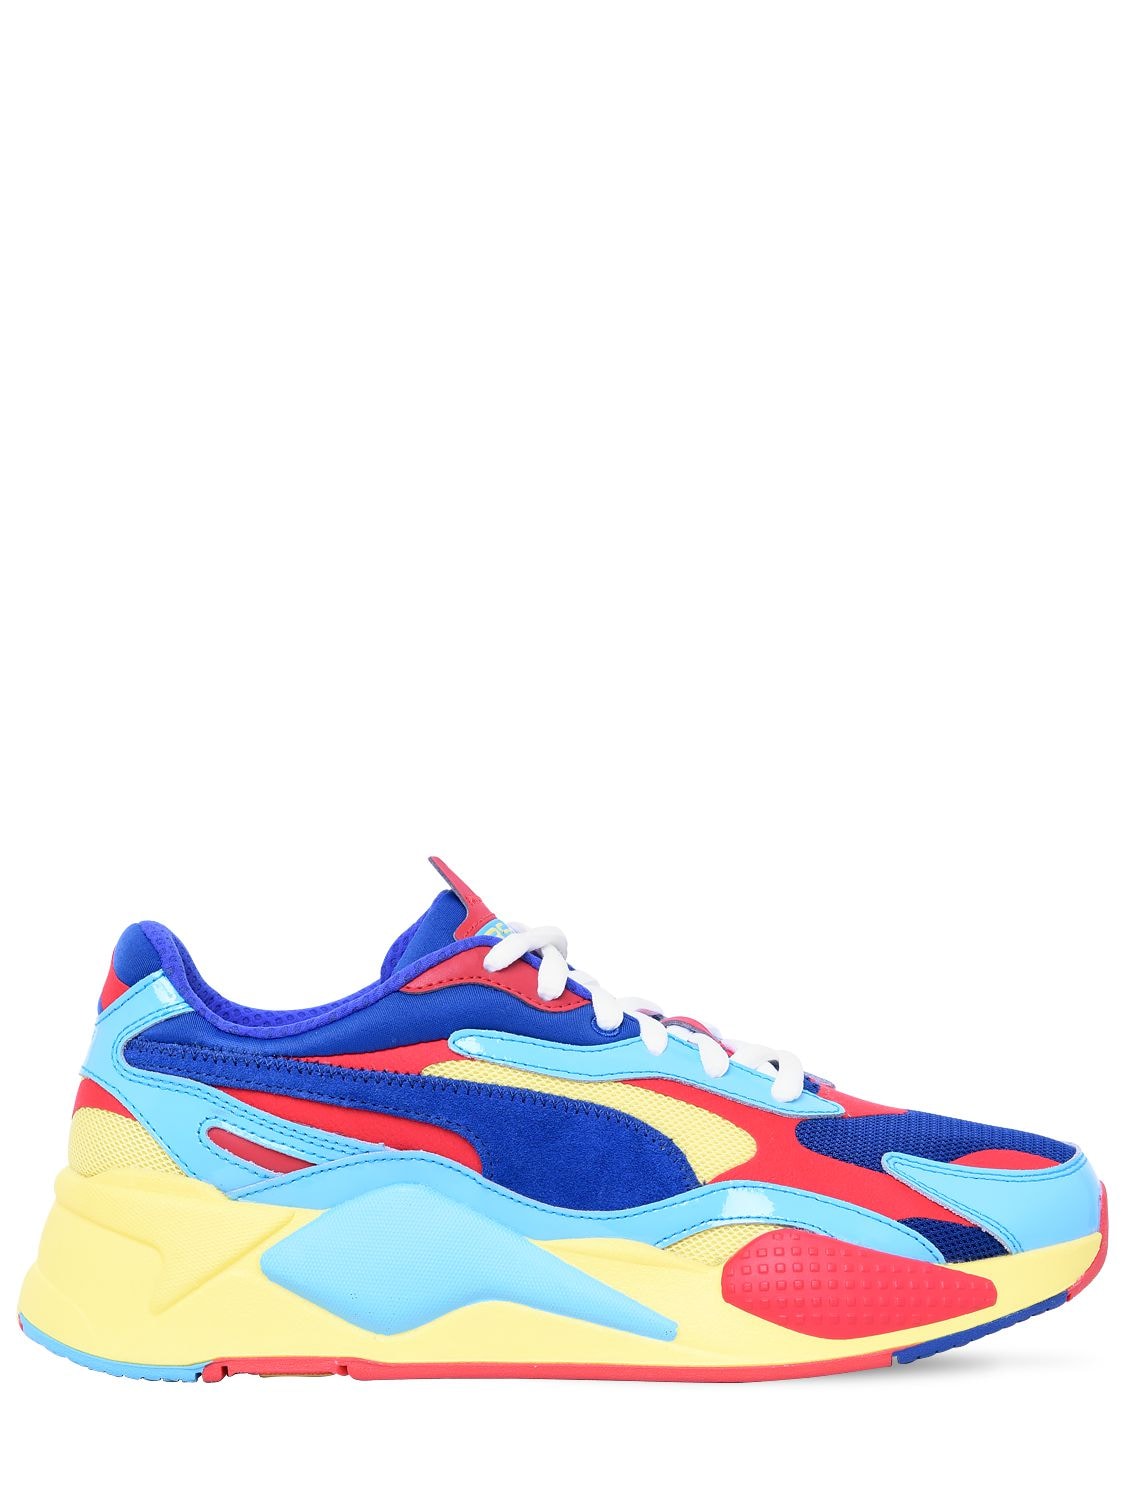 puma shoes red yellow blue